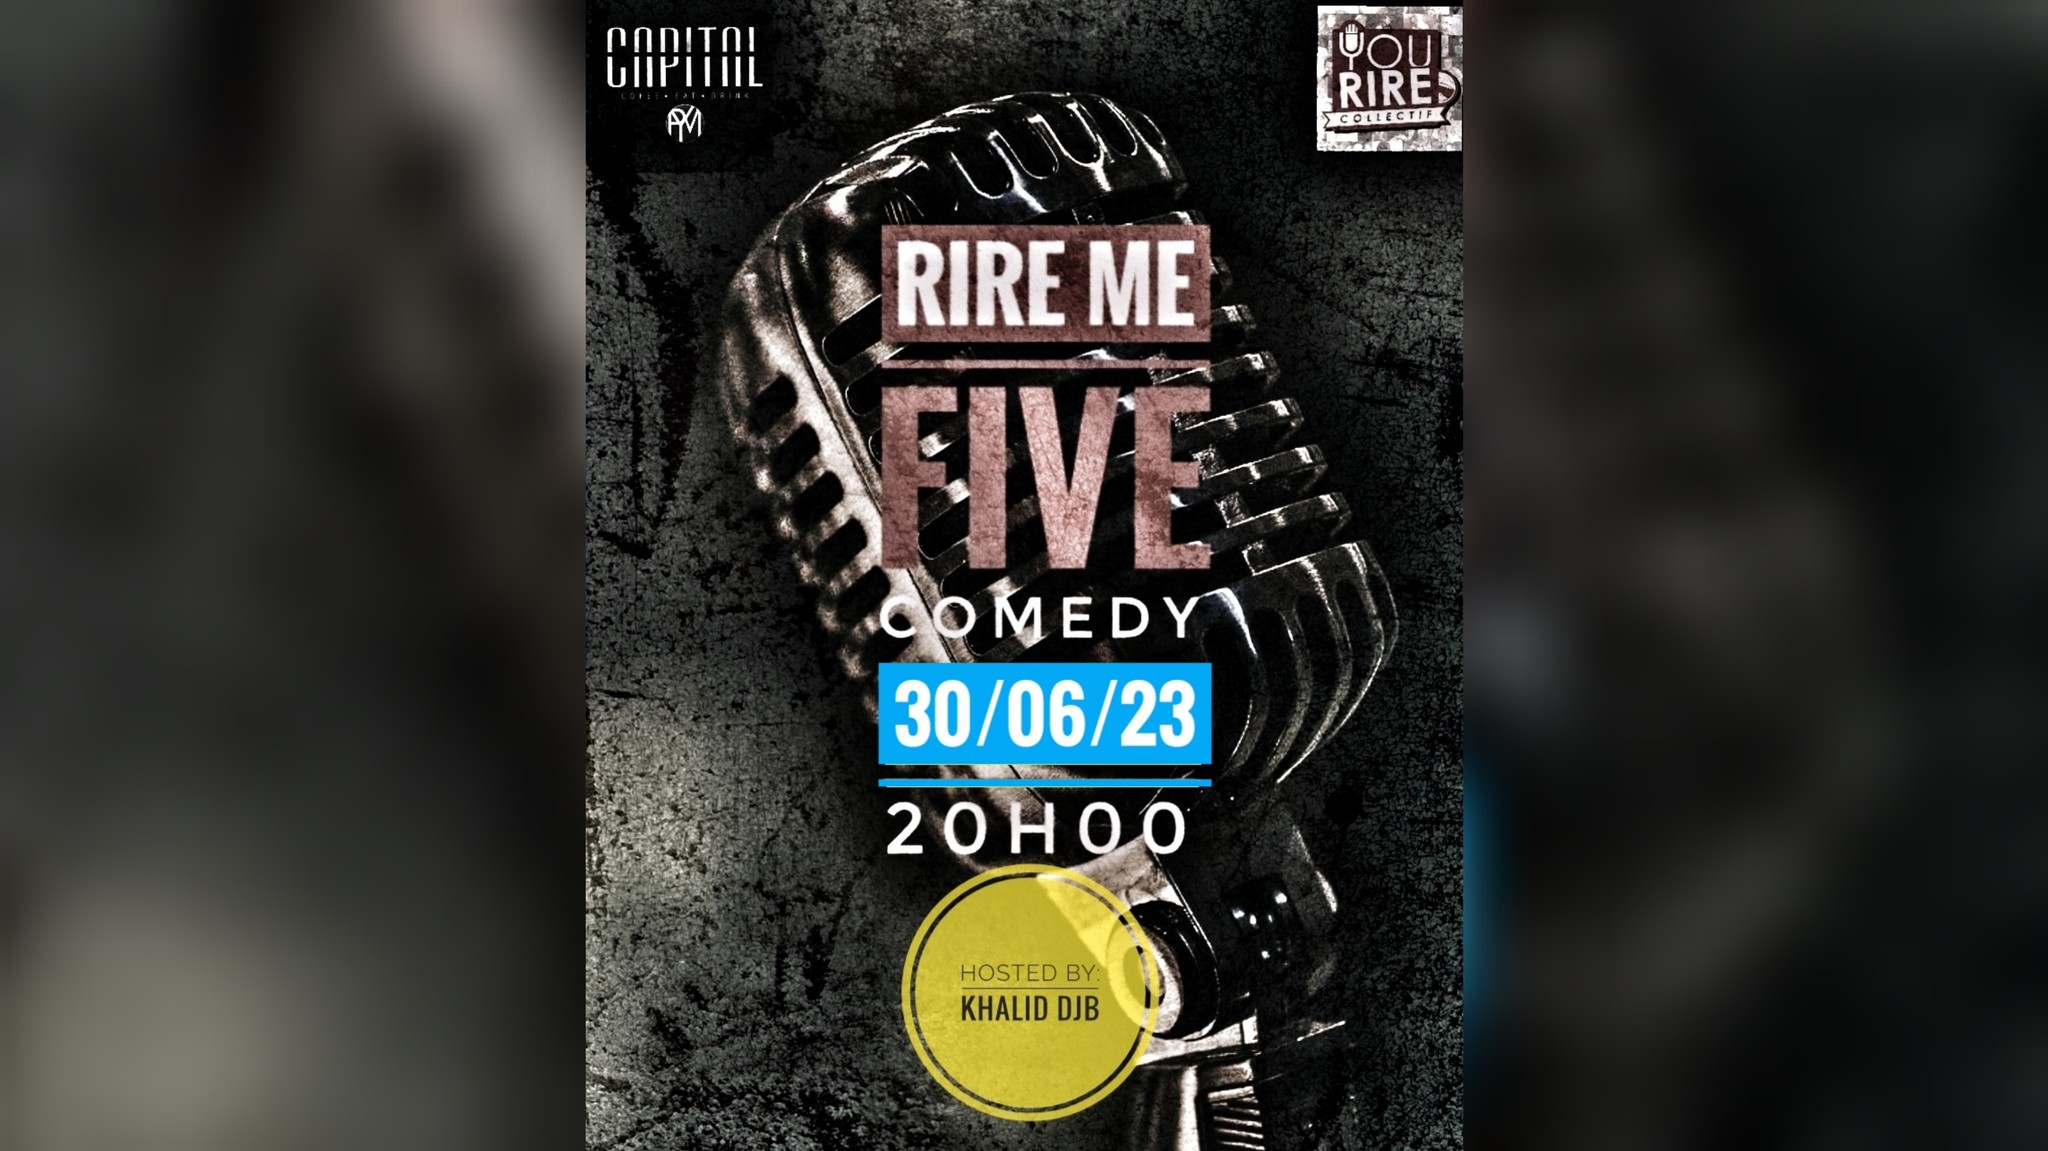 Le Rire Me Five Comedy/Yourire/Capital bar